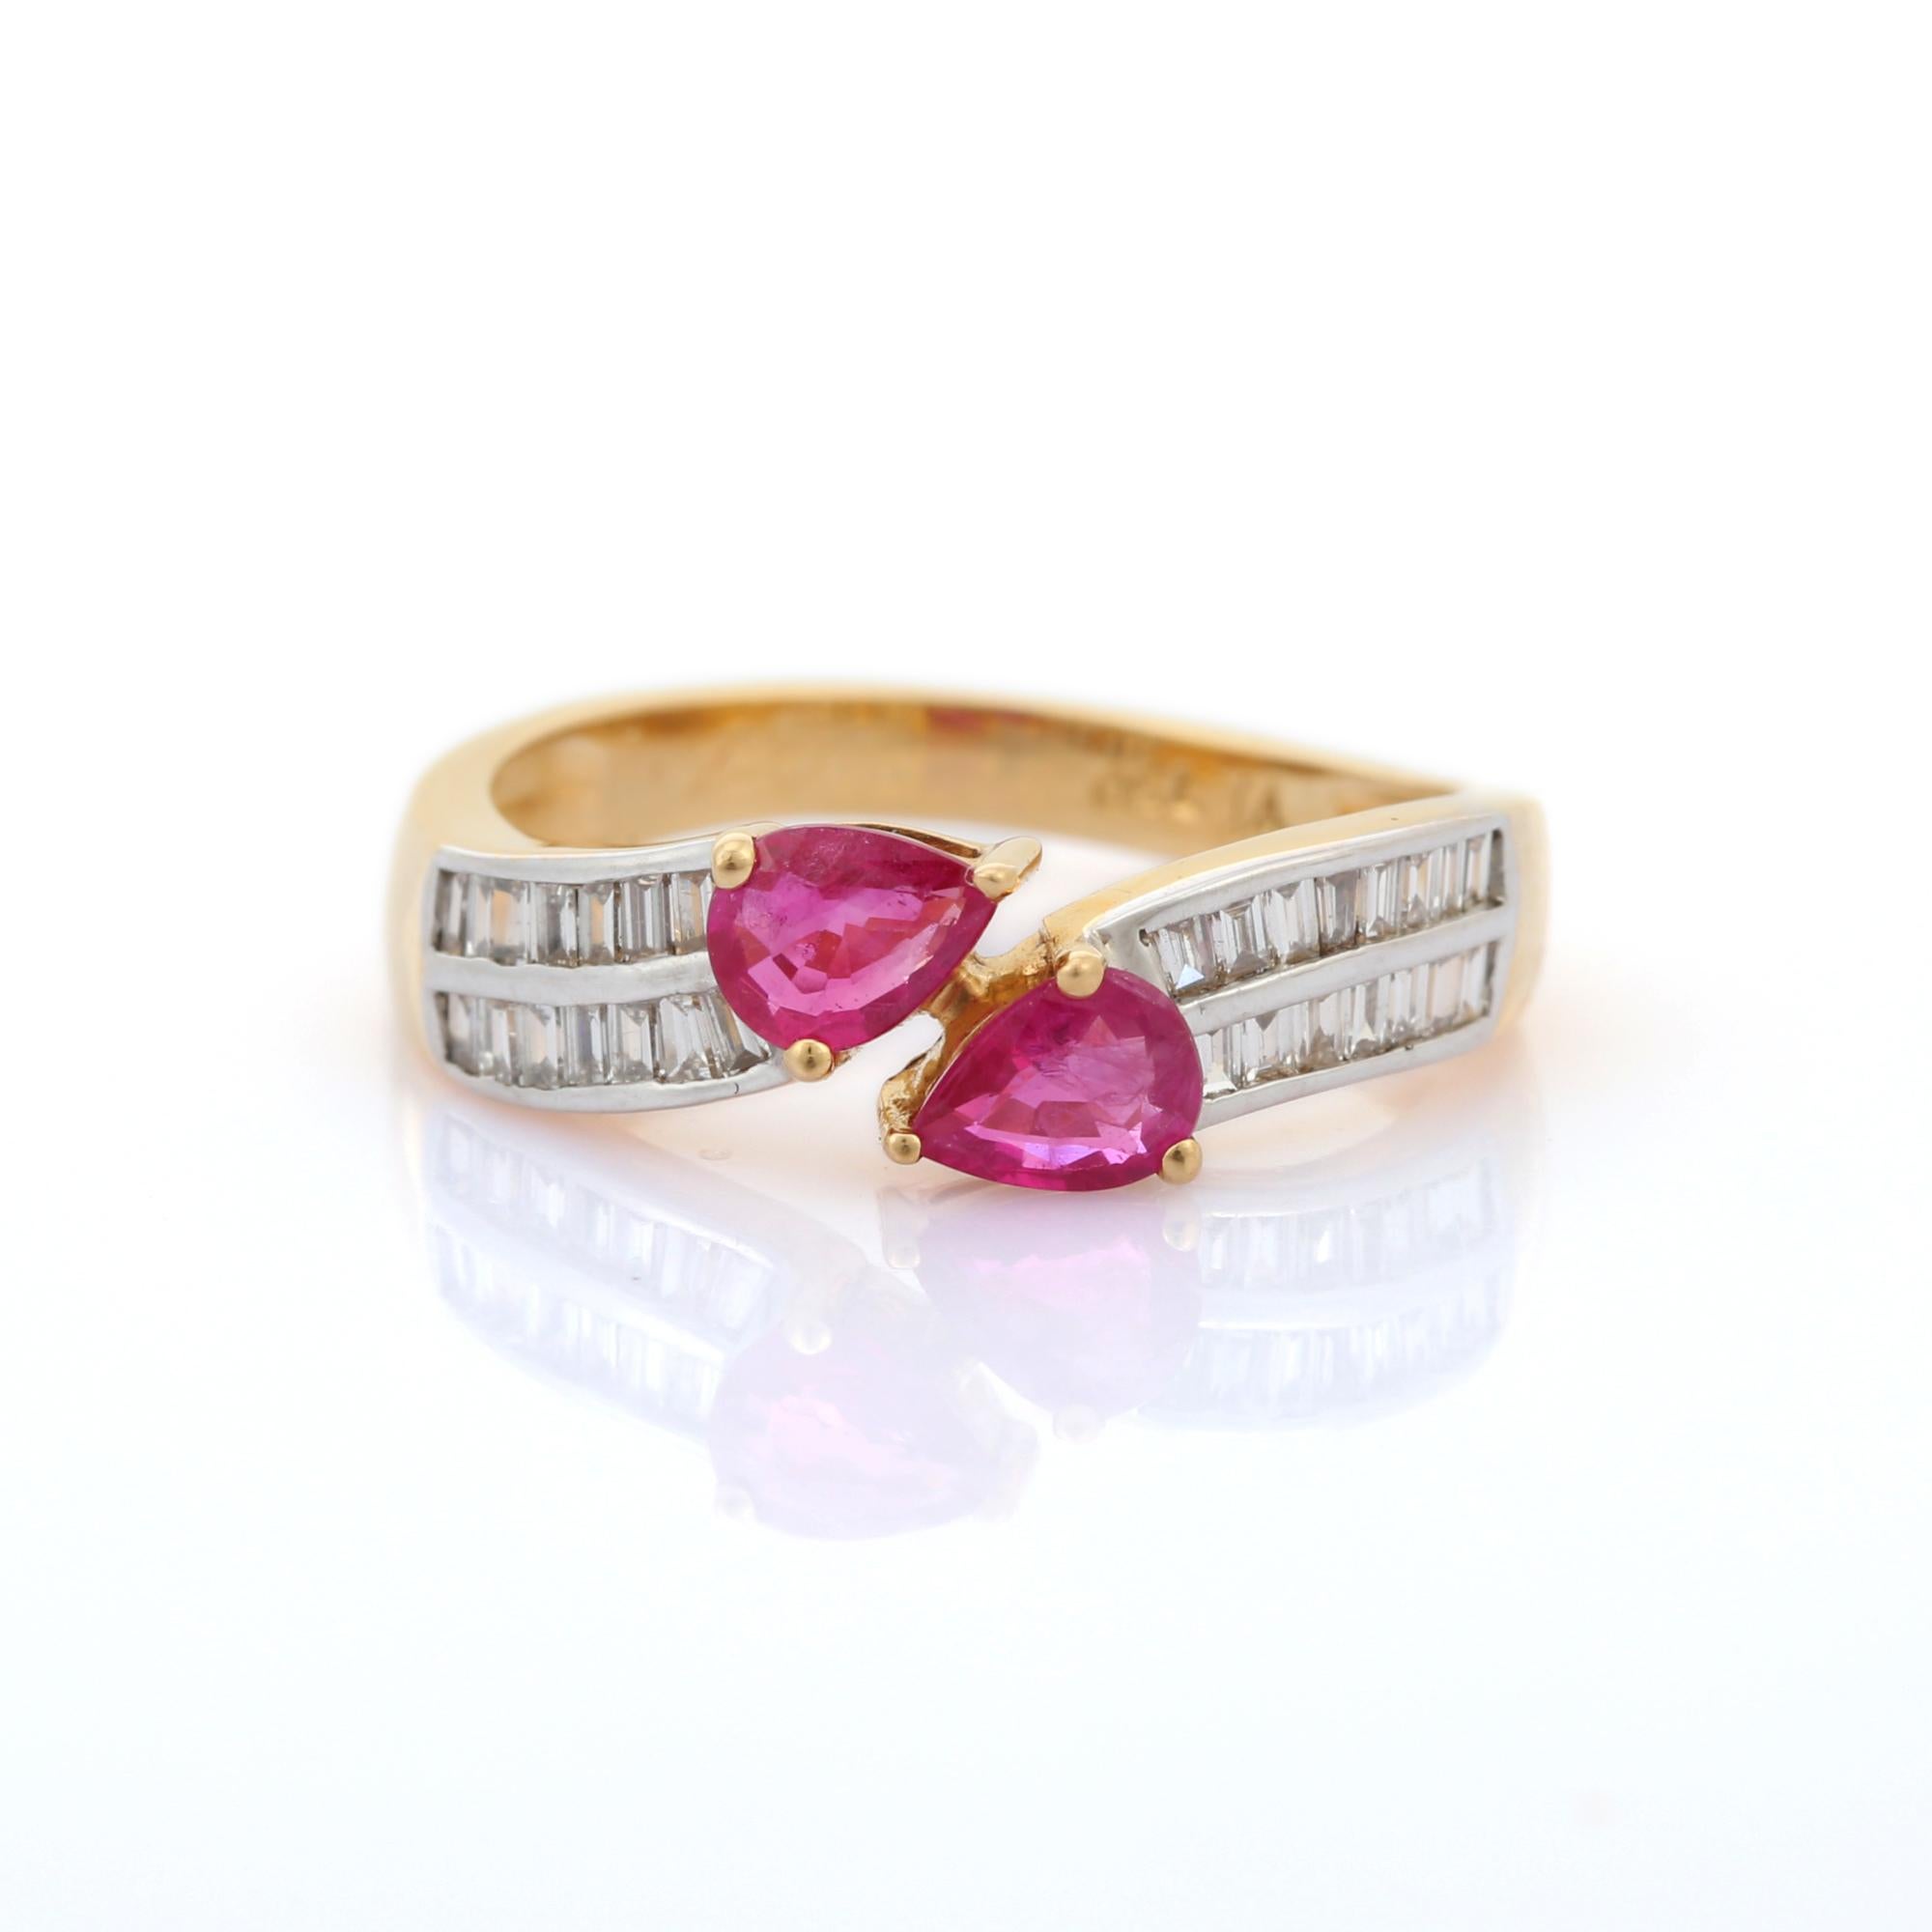 For Sale:  Handcrafted 18K Solid Yellow Gold Pear Cut Ruby and Diamond Wrap Around Ring 2